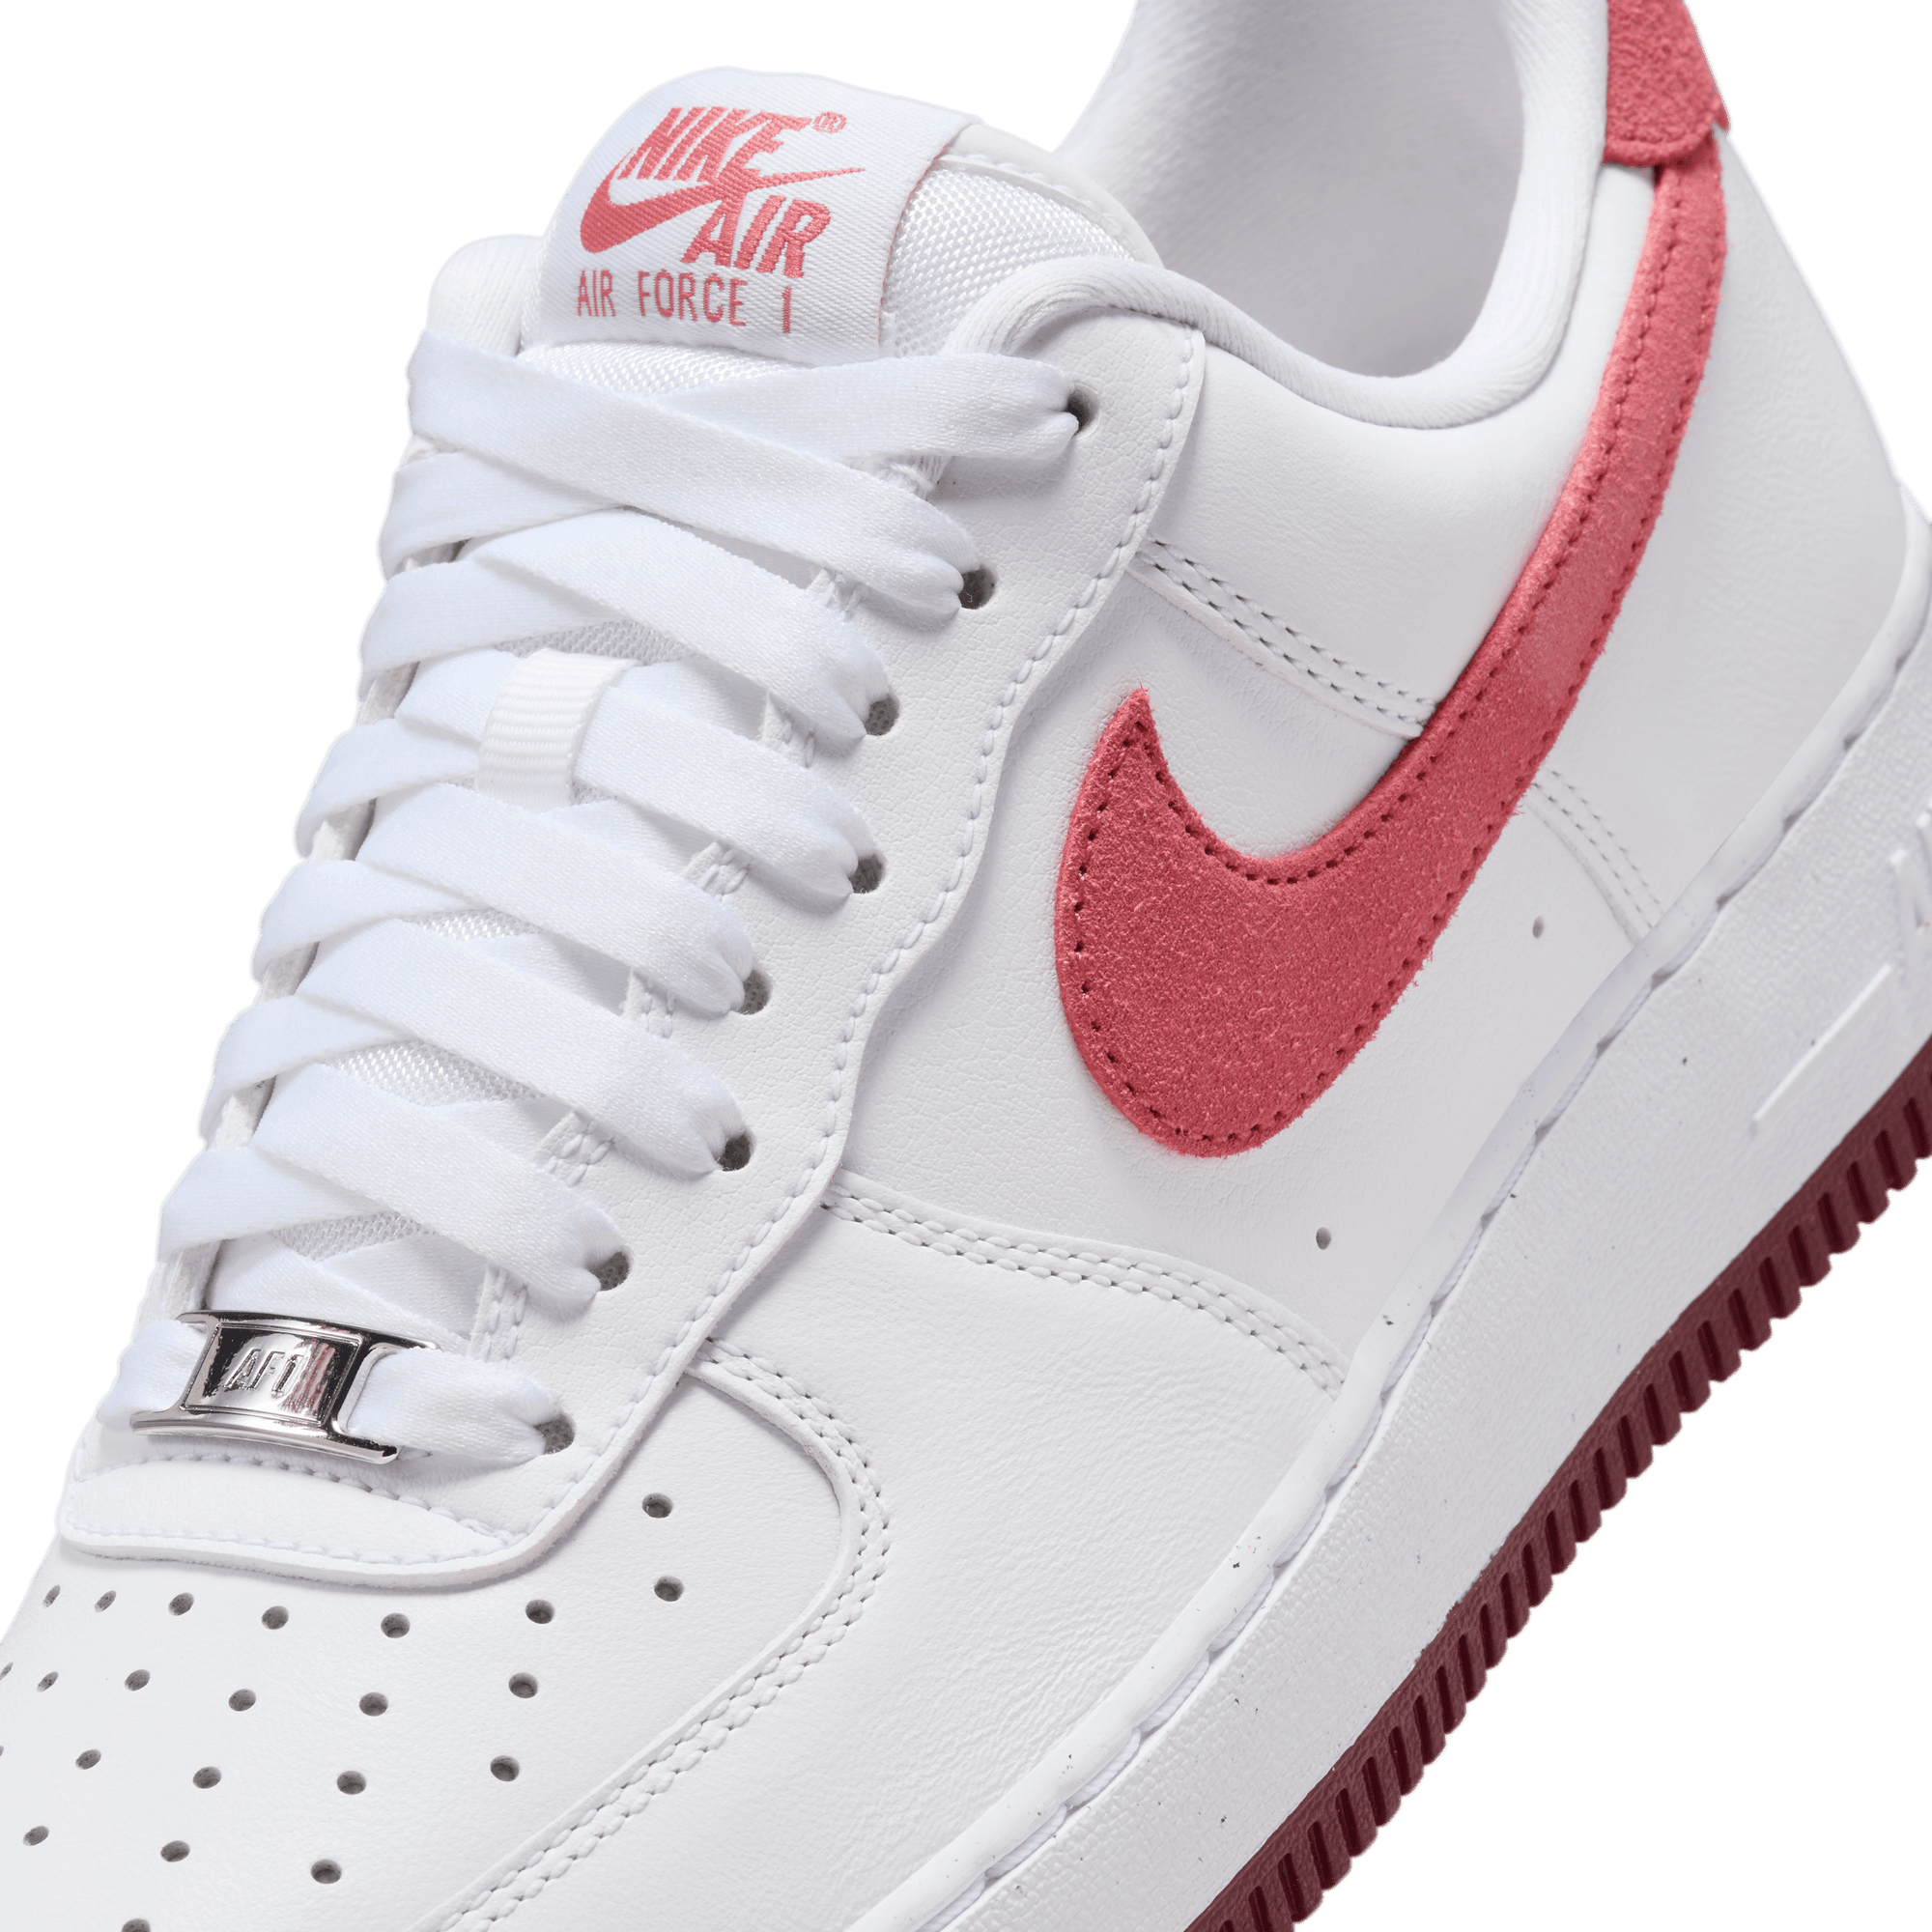 WMNS AIR FORCE 1 `07 "VALENTINE'S DAY"